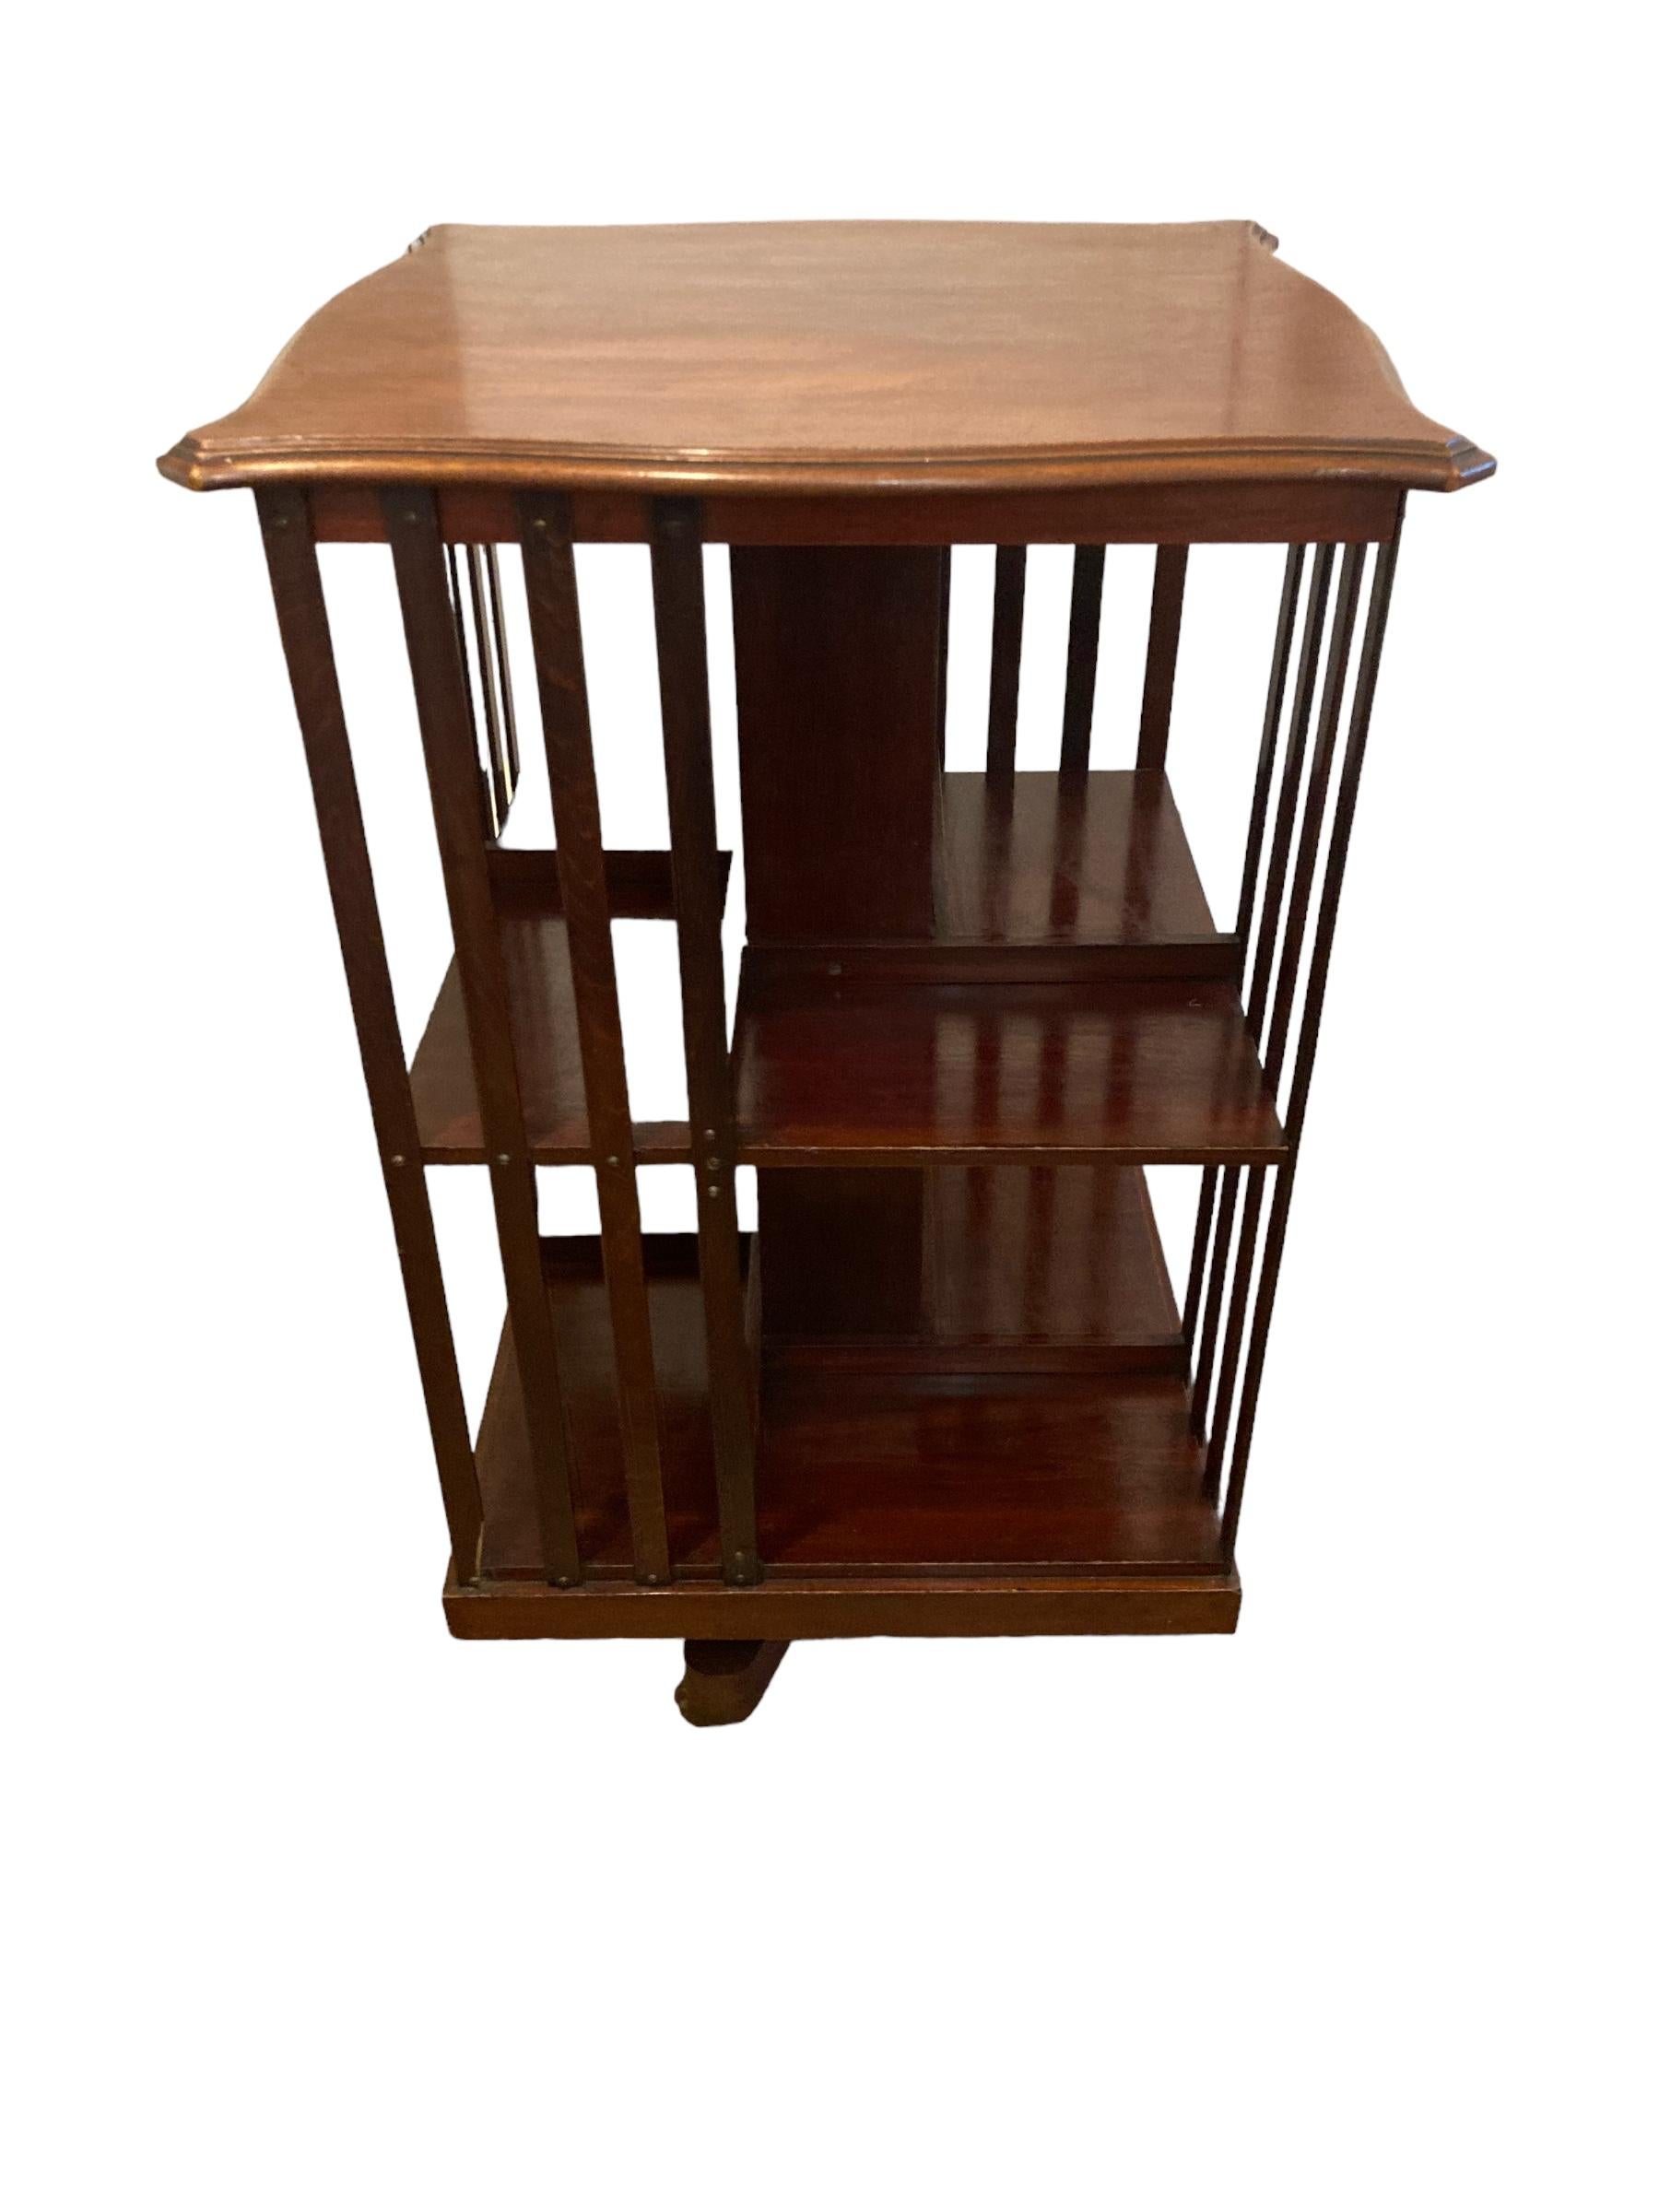 British Edwardian Mahogany revolving Bookcase on casters and slatted supports. For Sale